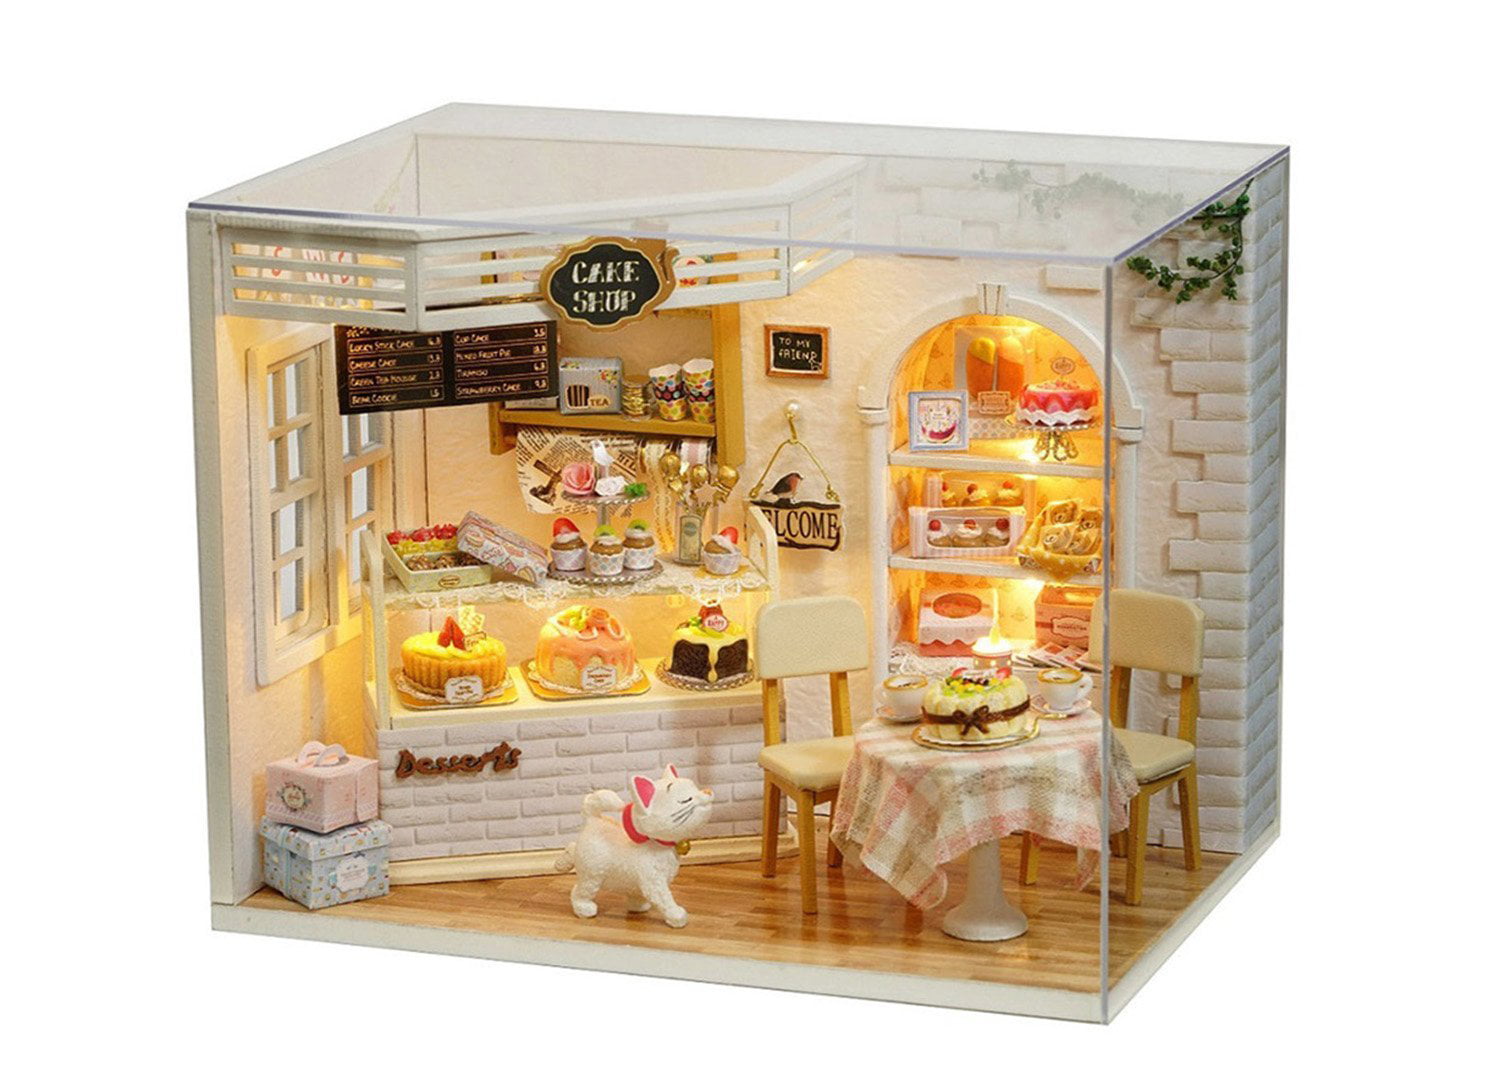 Dollhouse DIY Cake Shop With Furniture 1:24 scale